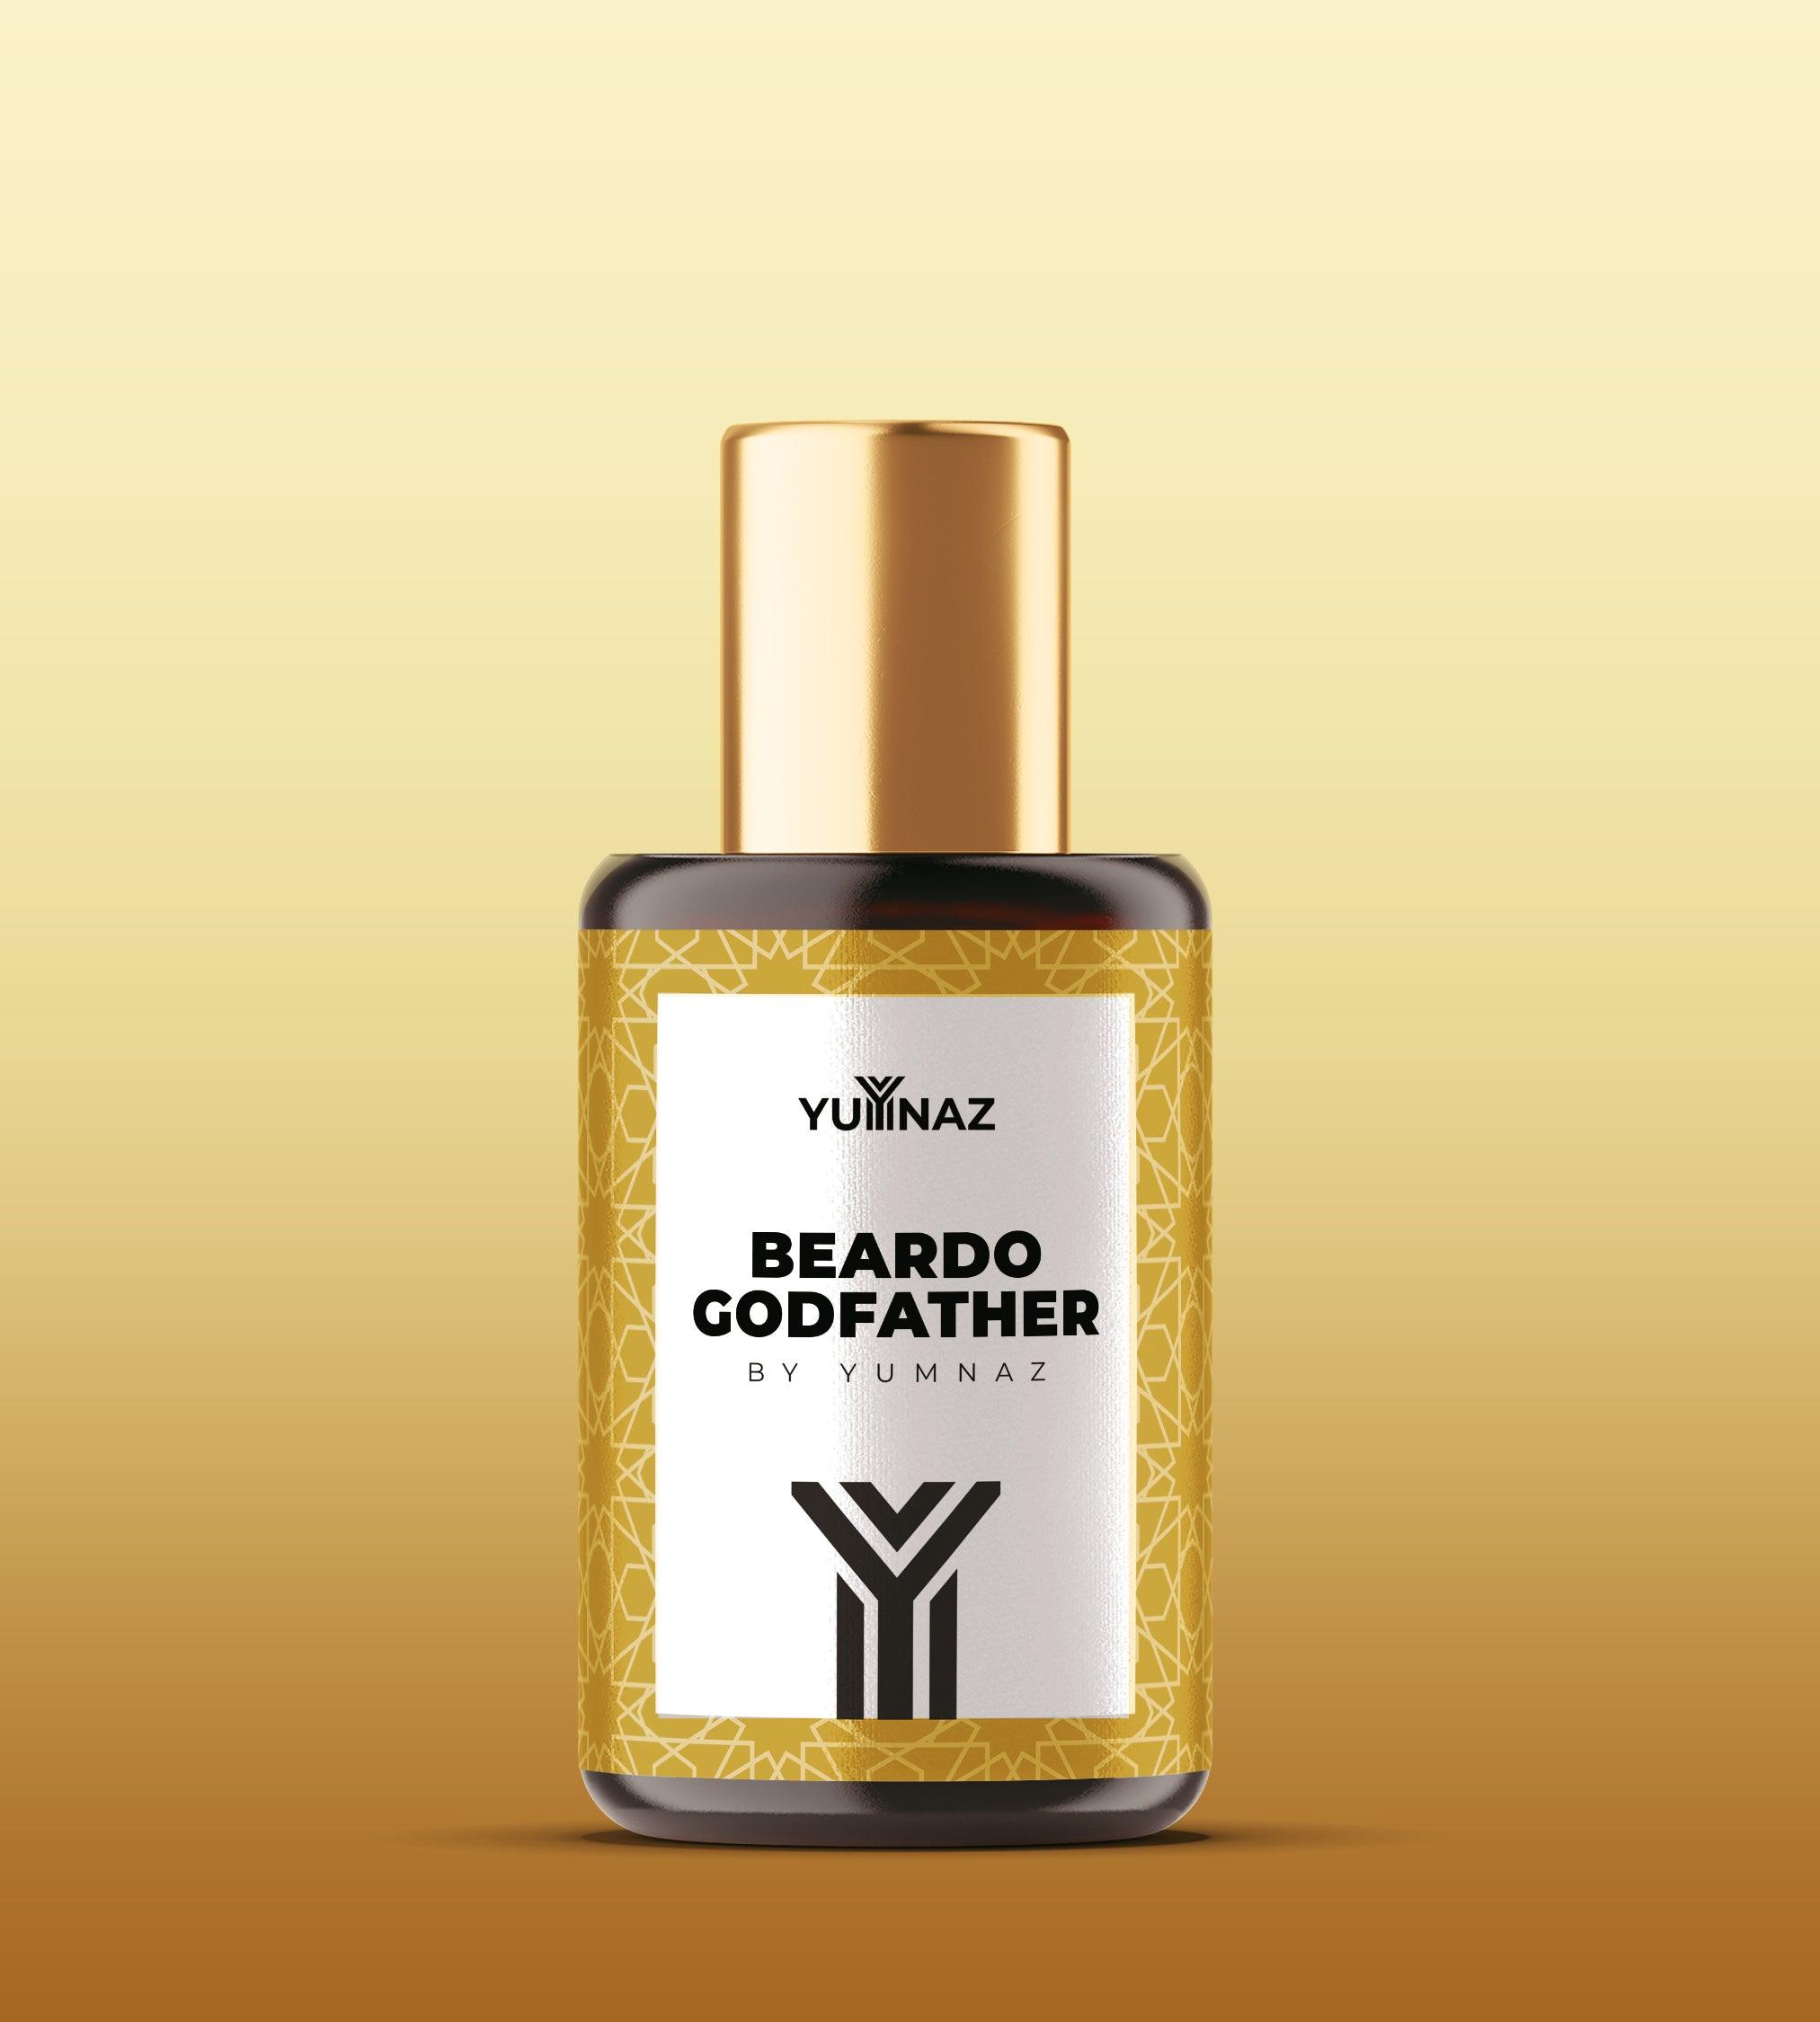 Beardo Godfather Perfume Price in Pakistan - Discover the Scent of Power